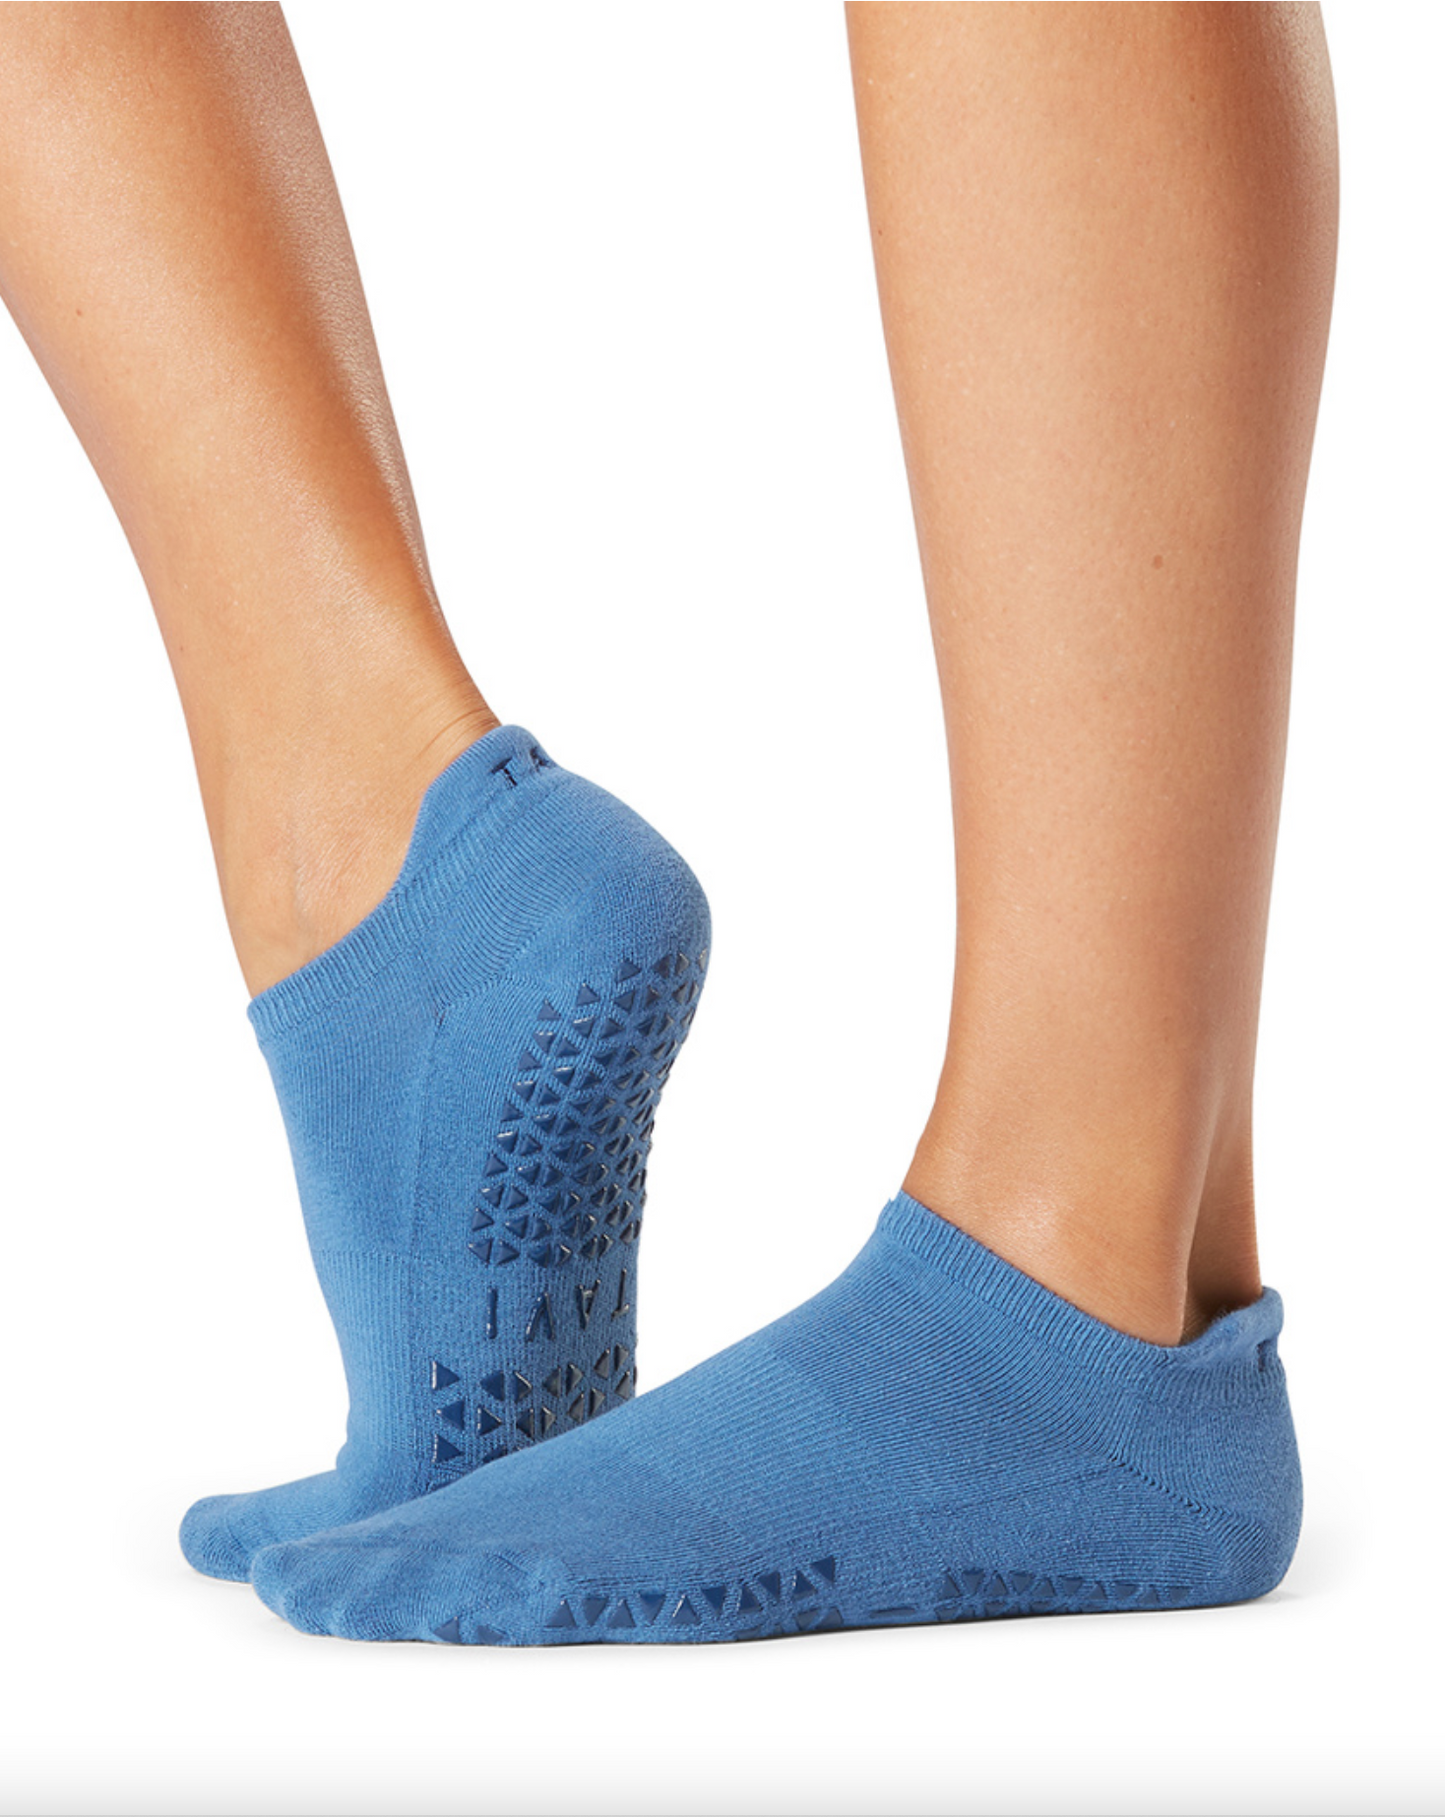 TaviNoir Savvy - sapphire blue low ankle cotton yoga and pilates socks with gripper sole.